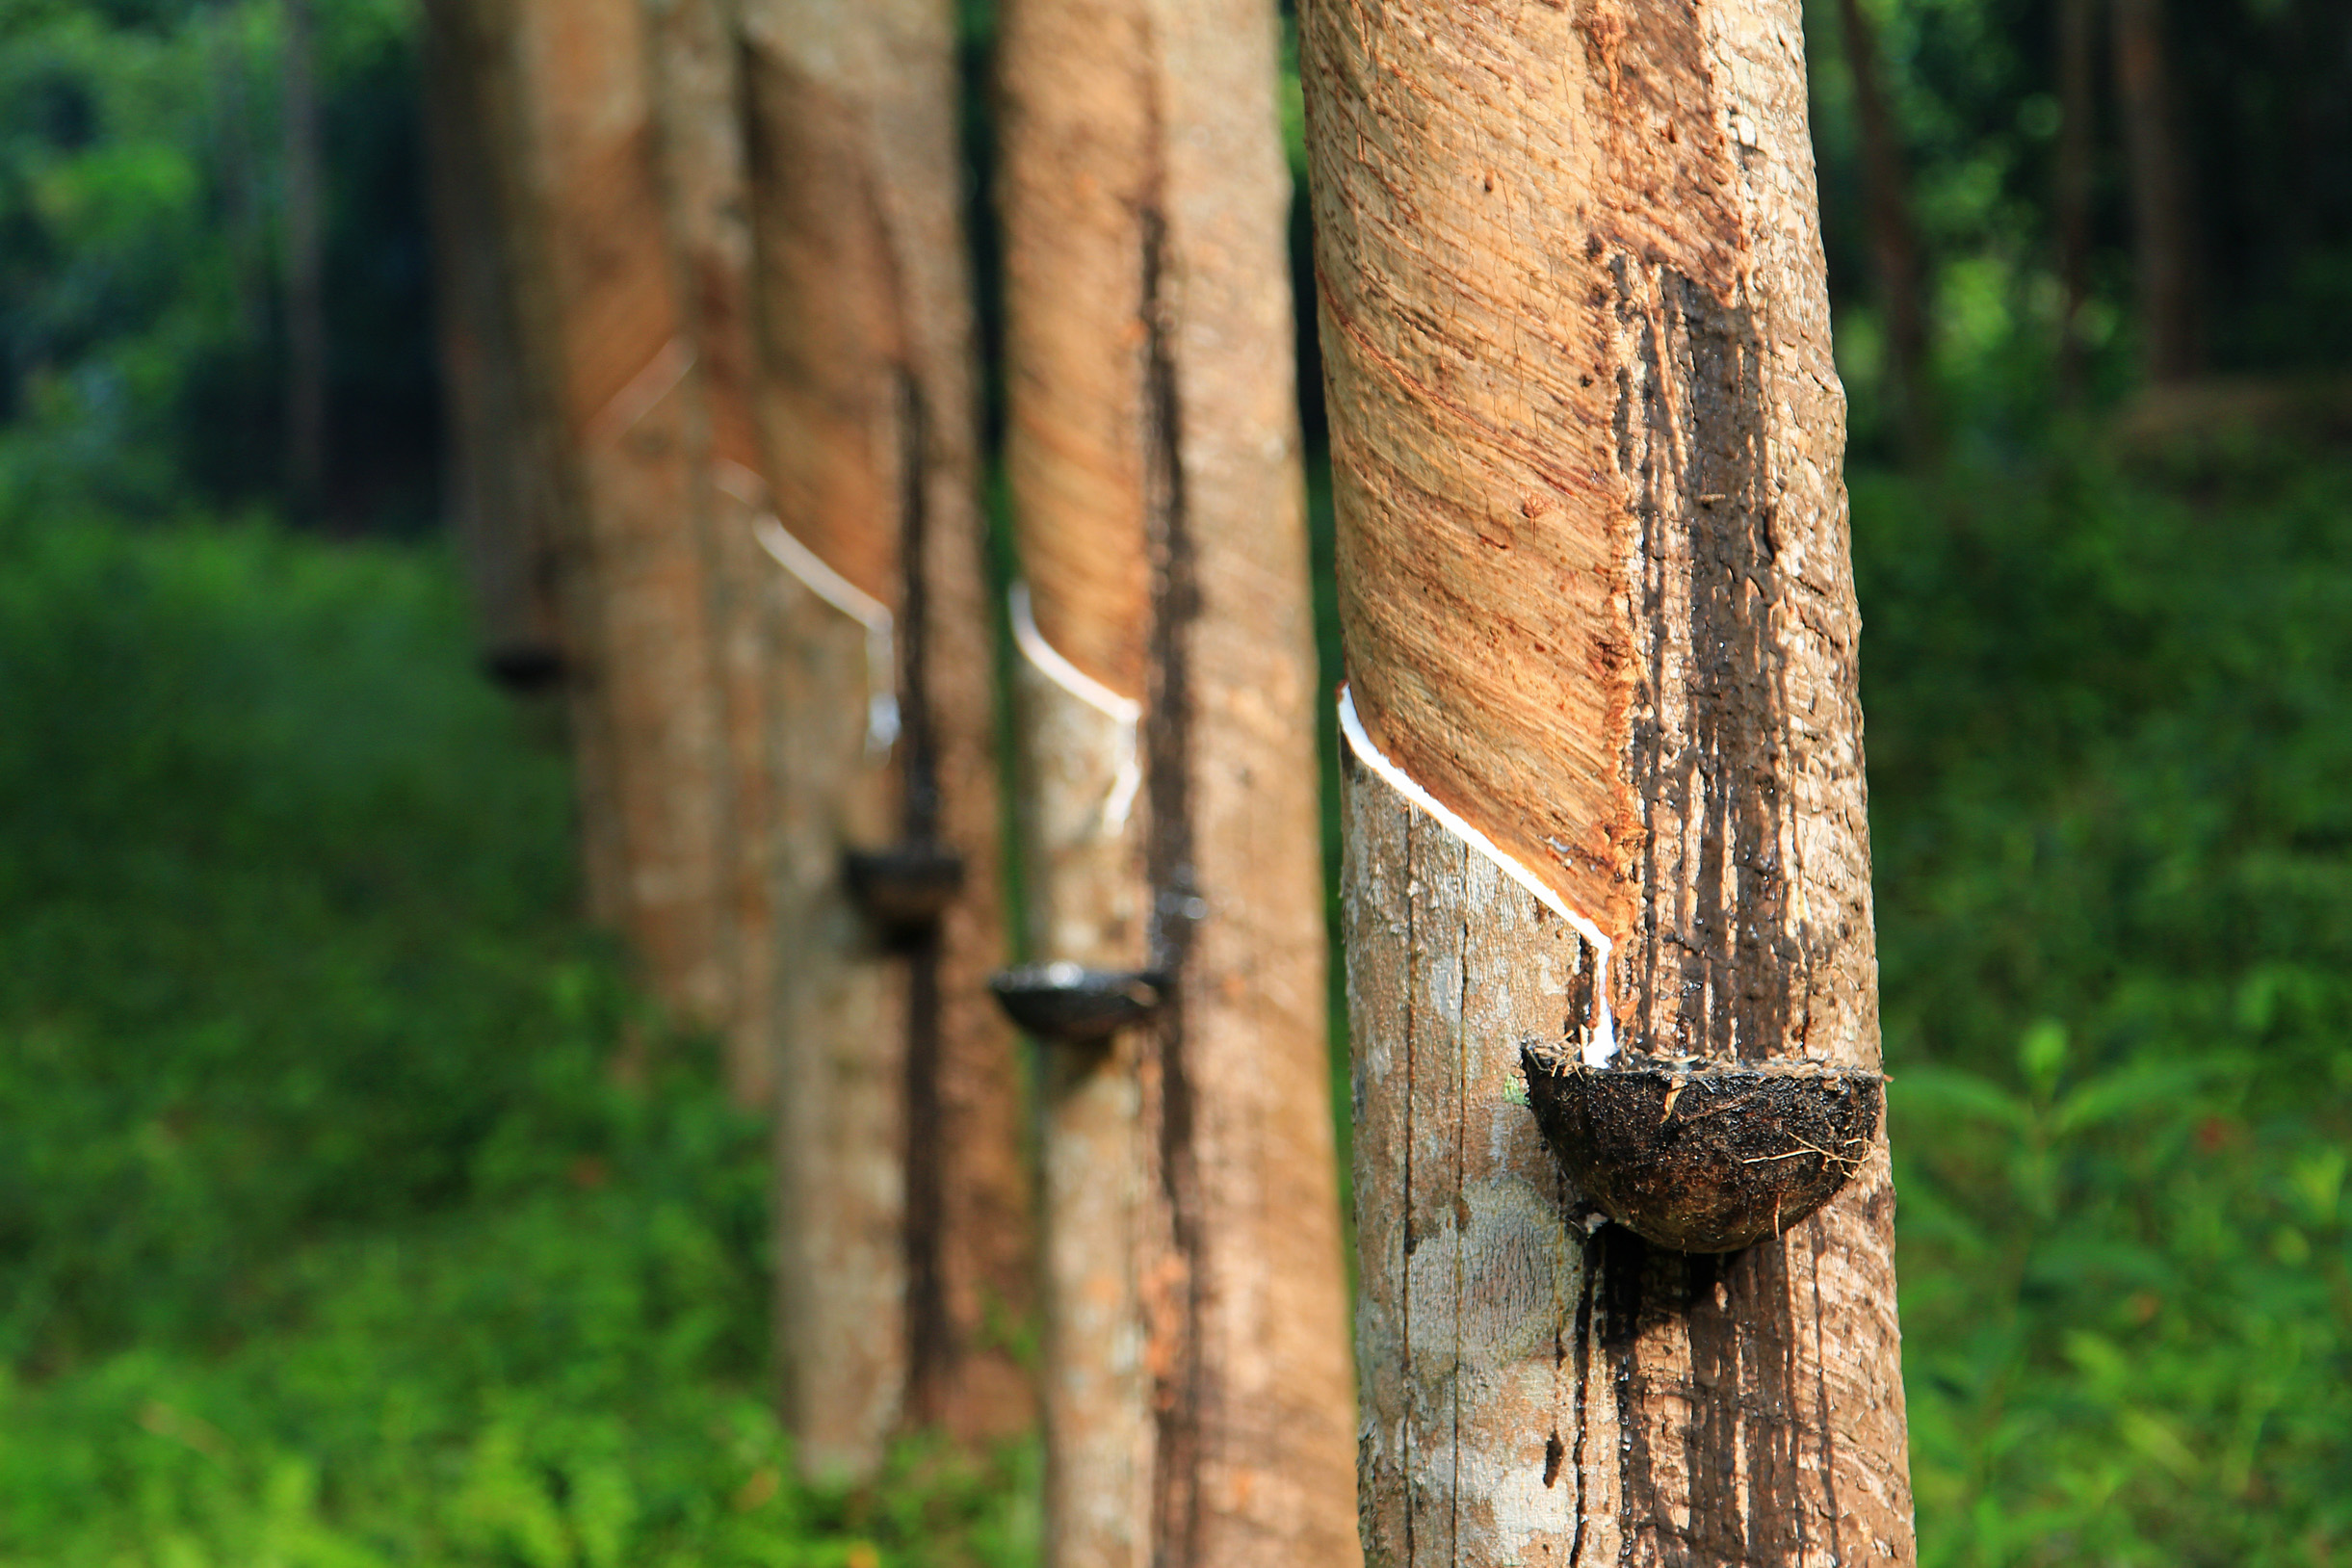 An image showing a line of trees in a rubber plantation with natural rubber being harvested.